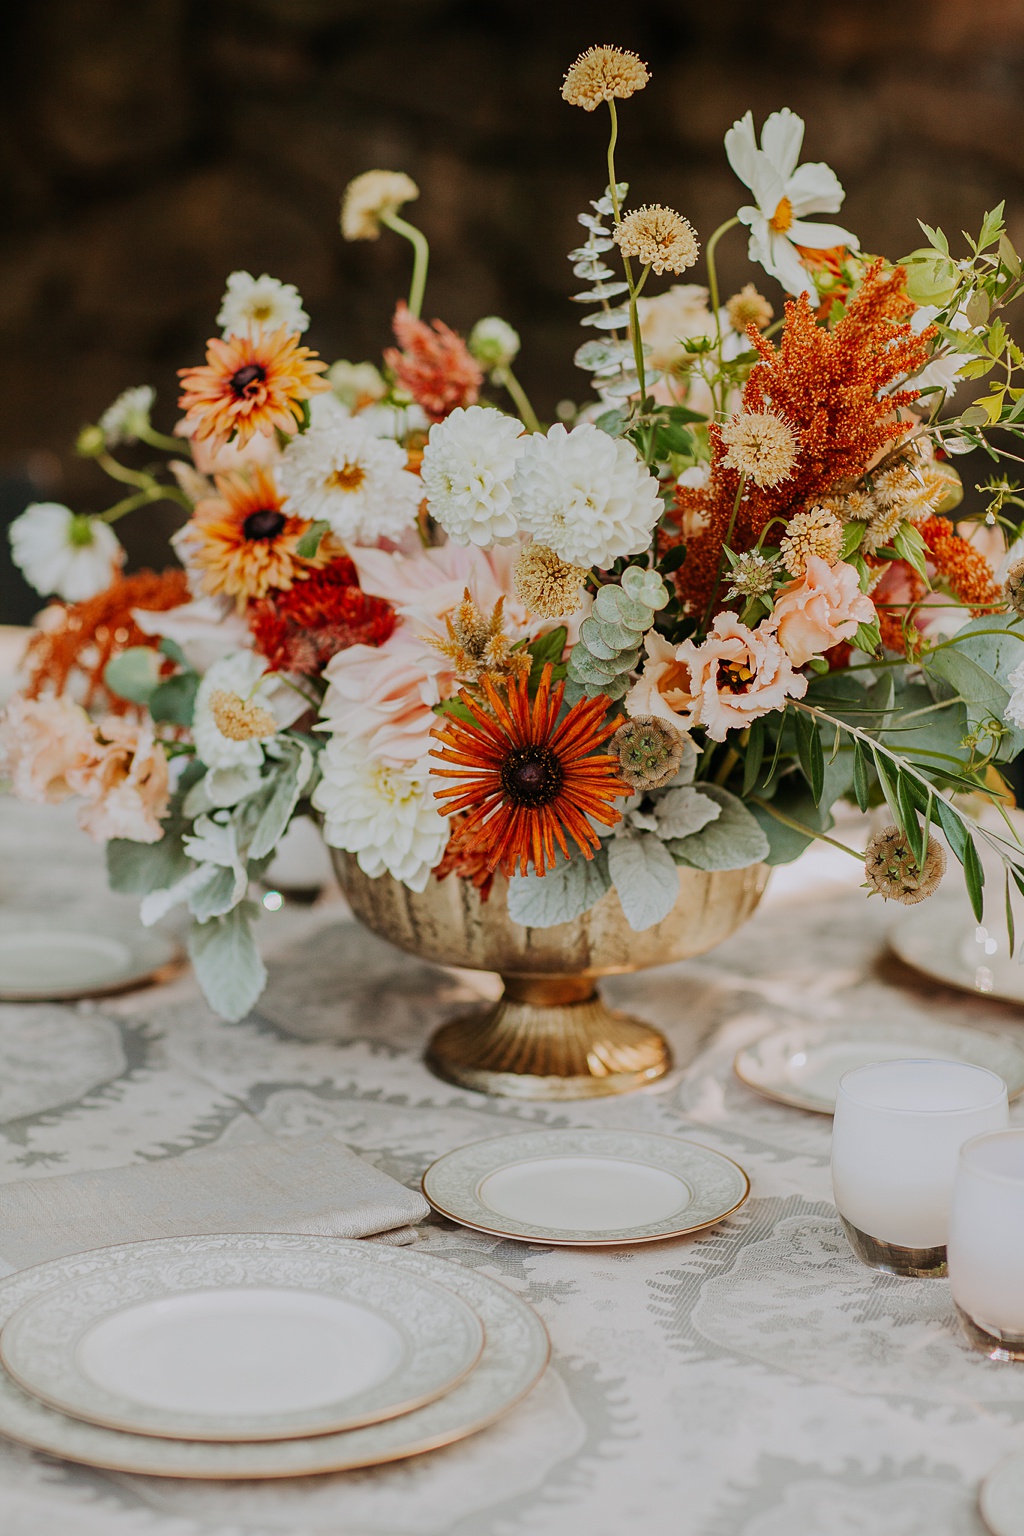 A wedding centerpiece highlighting most of our favorite August wedding flowers, including lisianthius